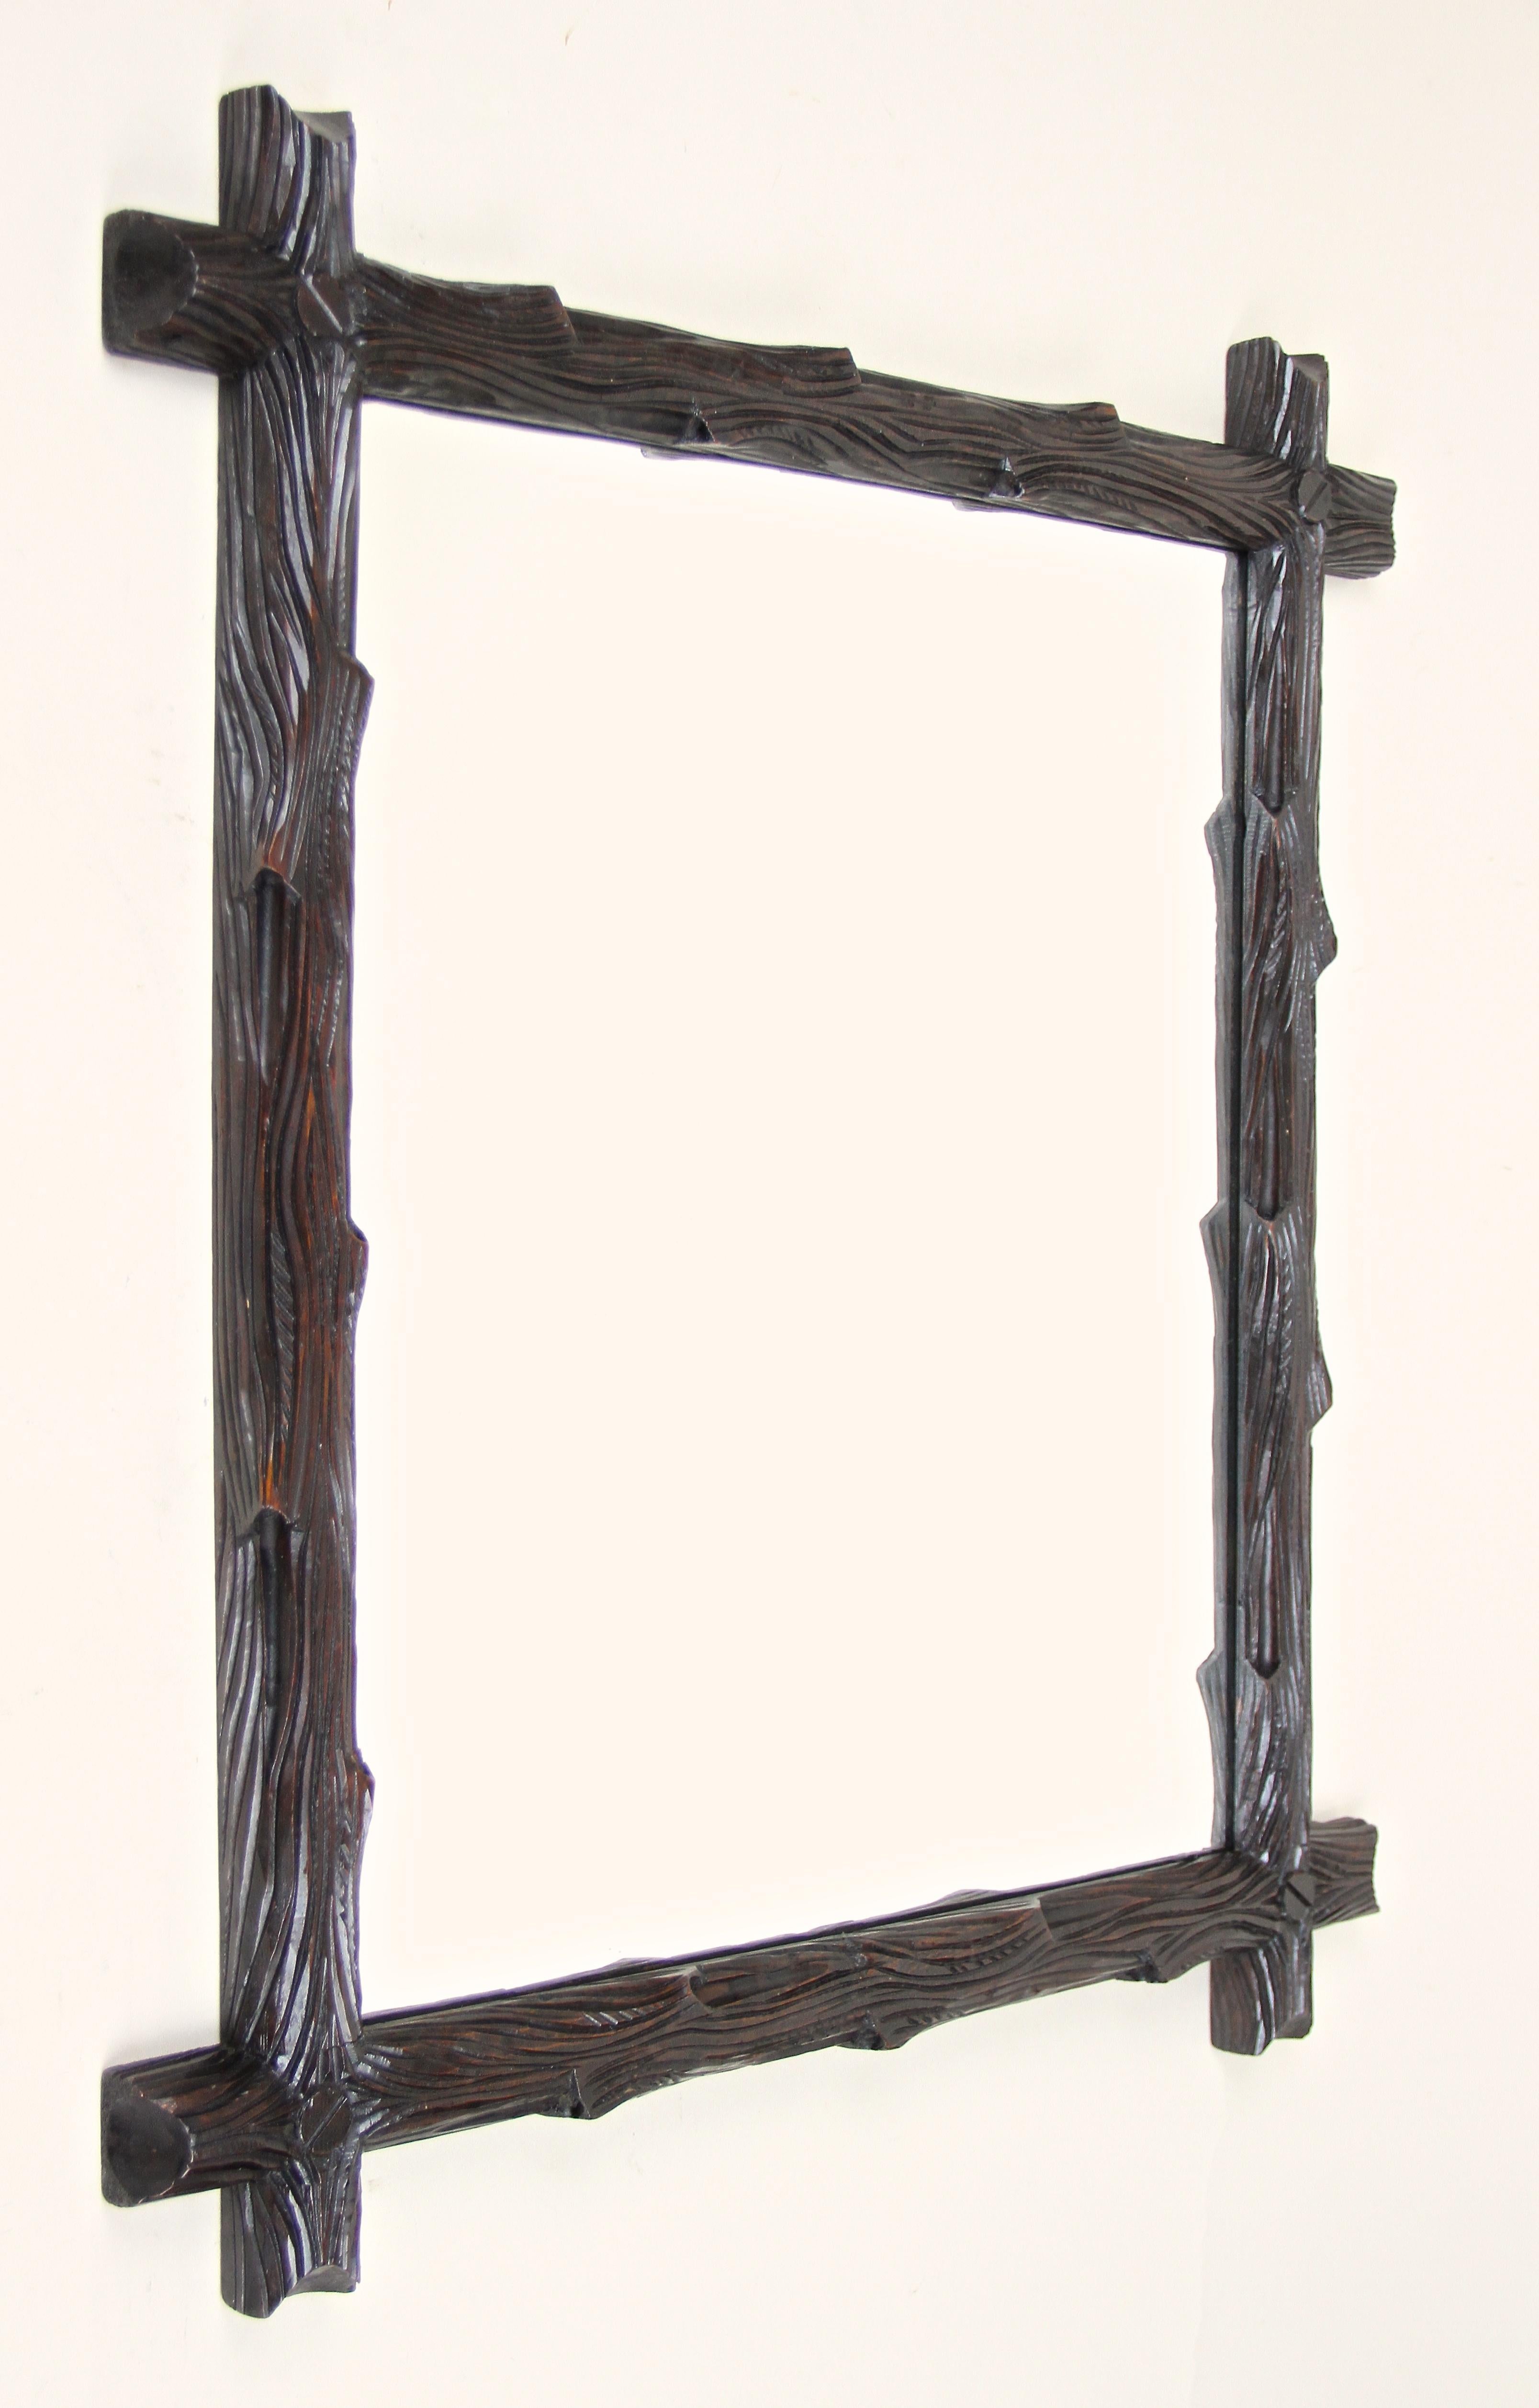 Outstanding Black Forest wall mirror out of Austria from circa 1880. This rustic style wooden mirror has been elaborately processed out of basswood and impresses with its artfully carved frame in the manner of tree branches. The beautiful darkbrown